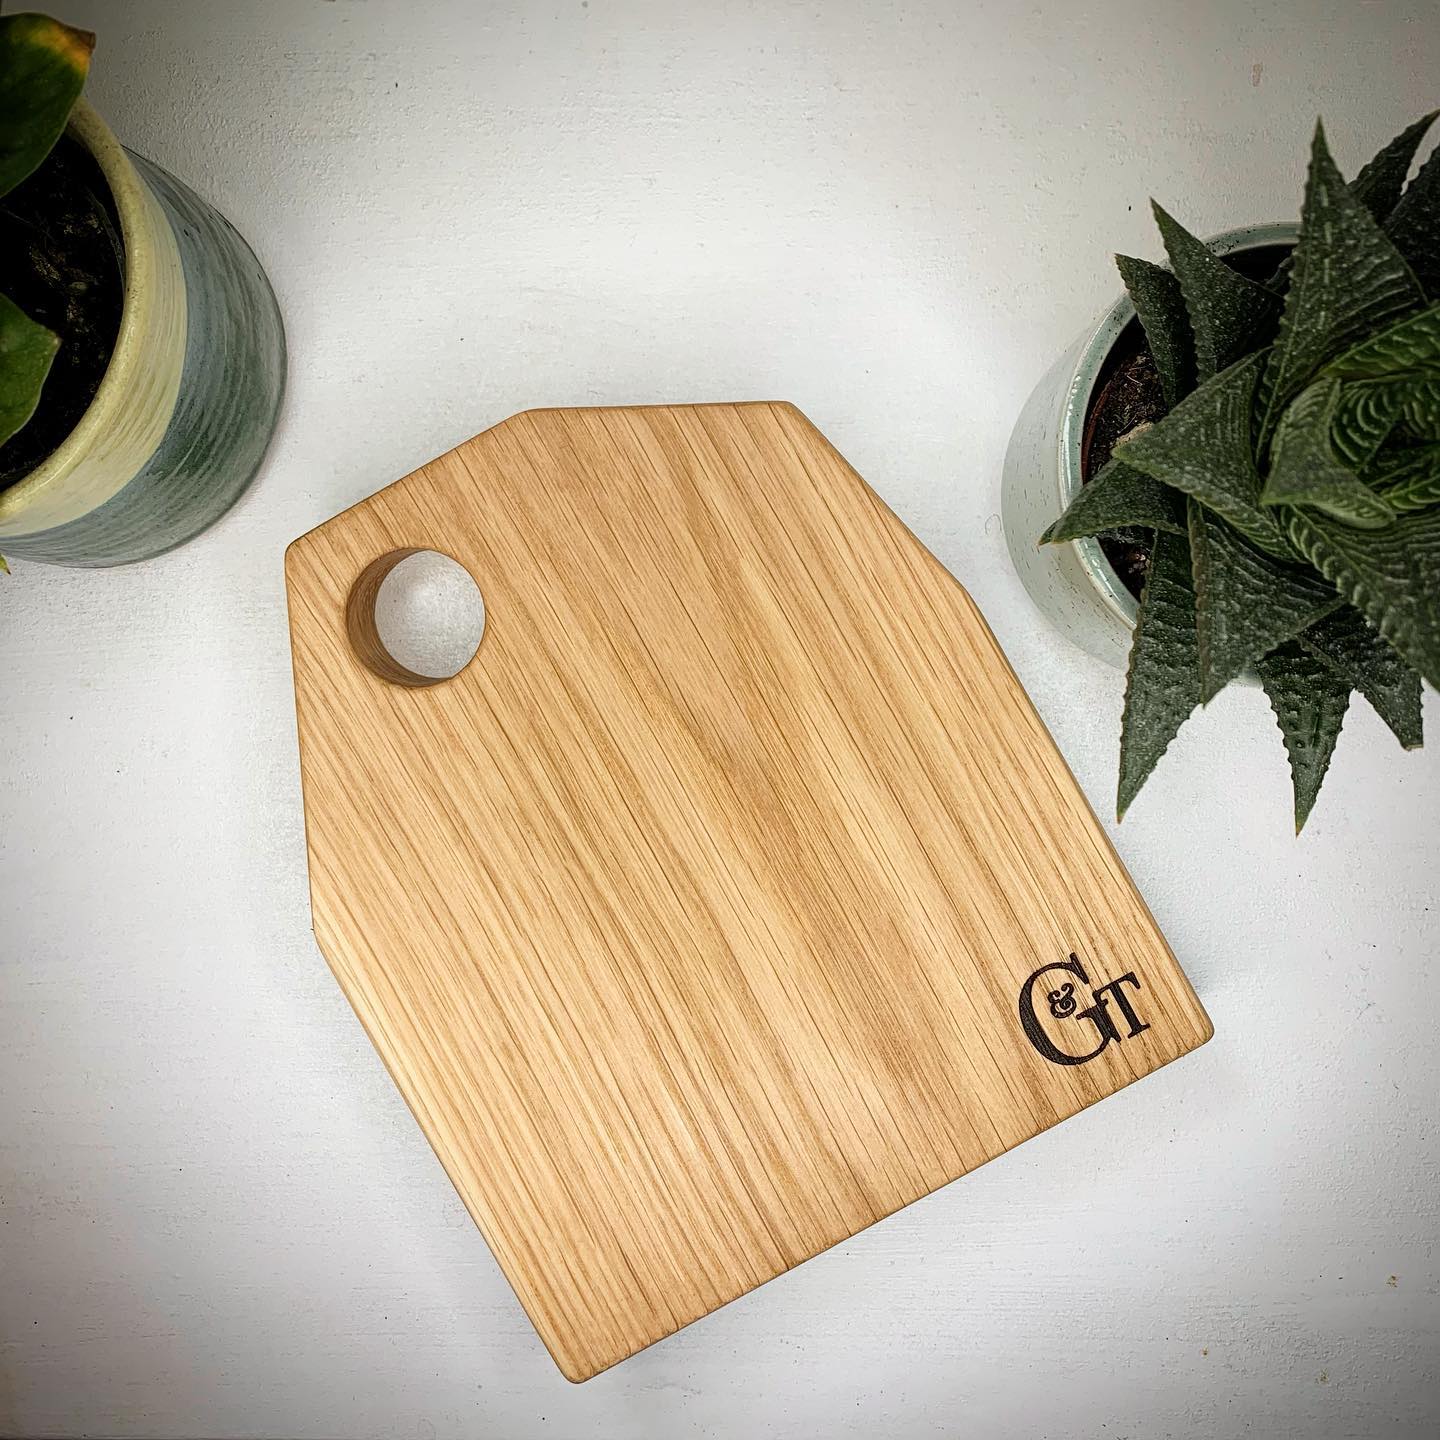 We were overwhelmed by the incredible reaction to our quirky oak boards, so we’ve decided to post a few for sale before our next market. Each photo is numbered and marked with approximate measurements. ️️️ If you’d like one, please comment below with SOLD and the number and we’ll get in touch ?£8.50 each with free UK only postage..#lovetocook #handcrafted #homedecor #beunique #oak #oneofakind #ginger #tweed #kitchen #giftideas #gandt #smallbusiness